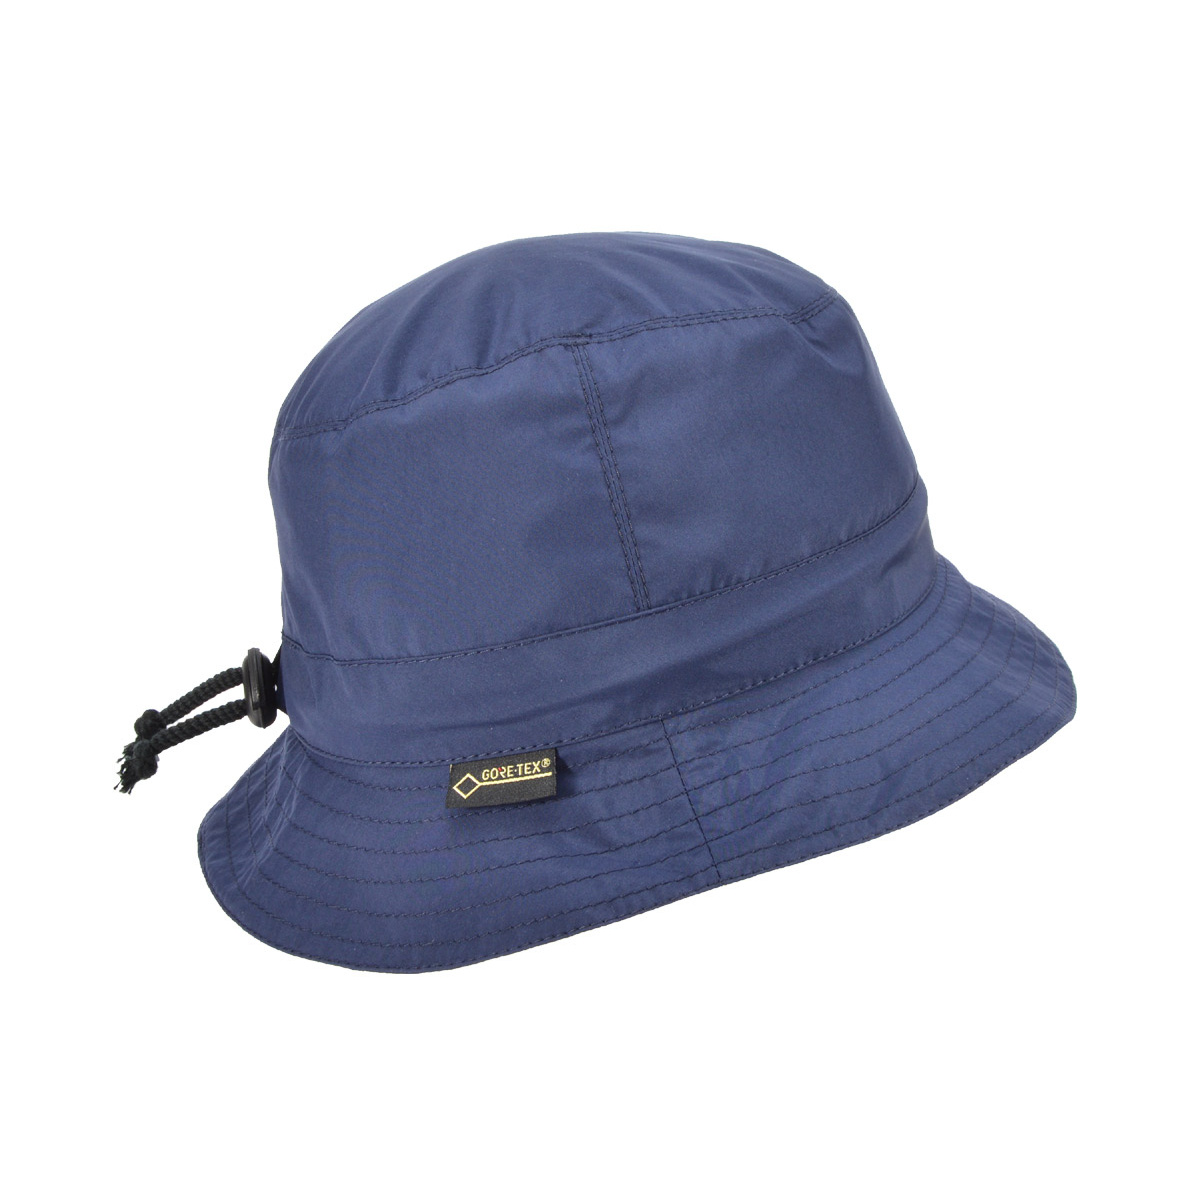 gore tex hat Reference : 9785 | Chapellerie Traclet